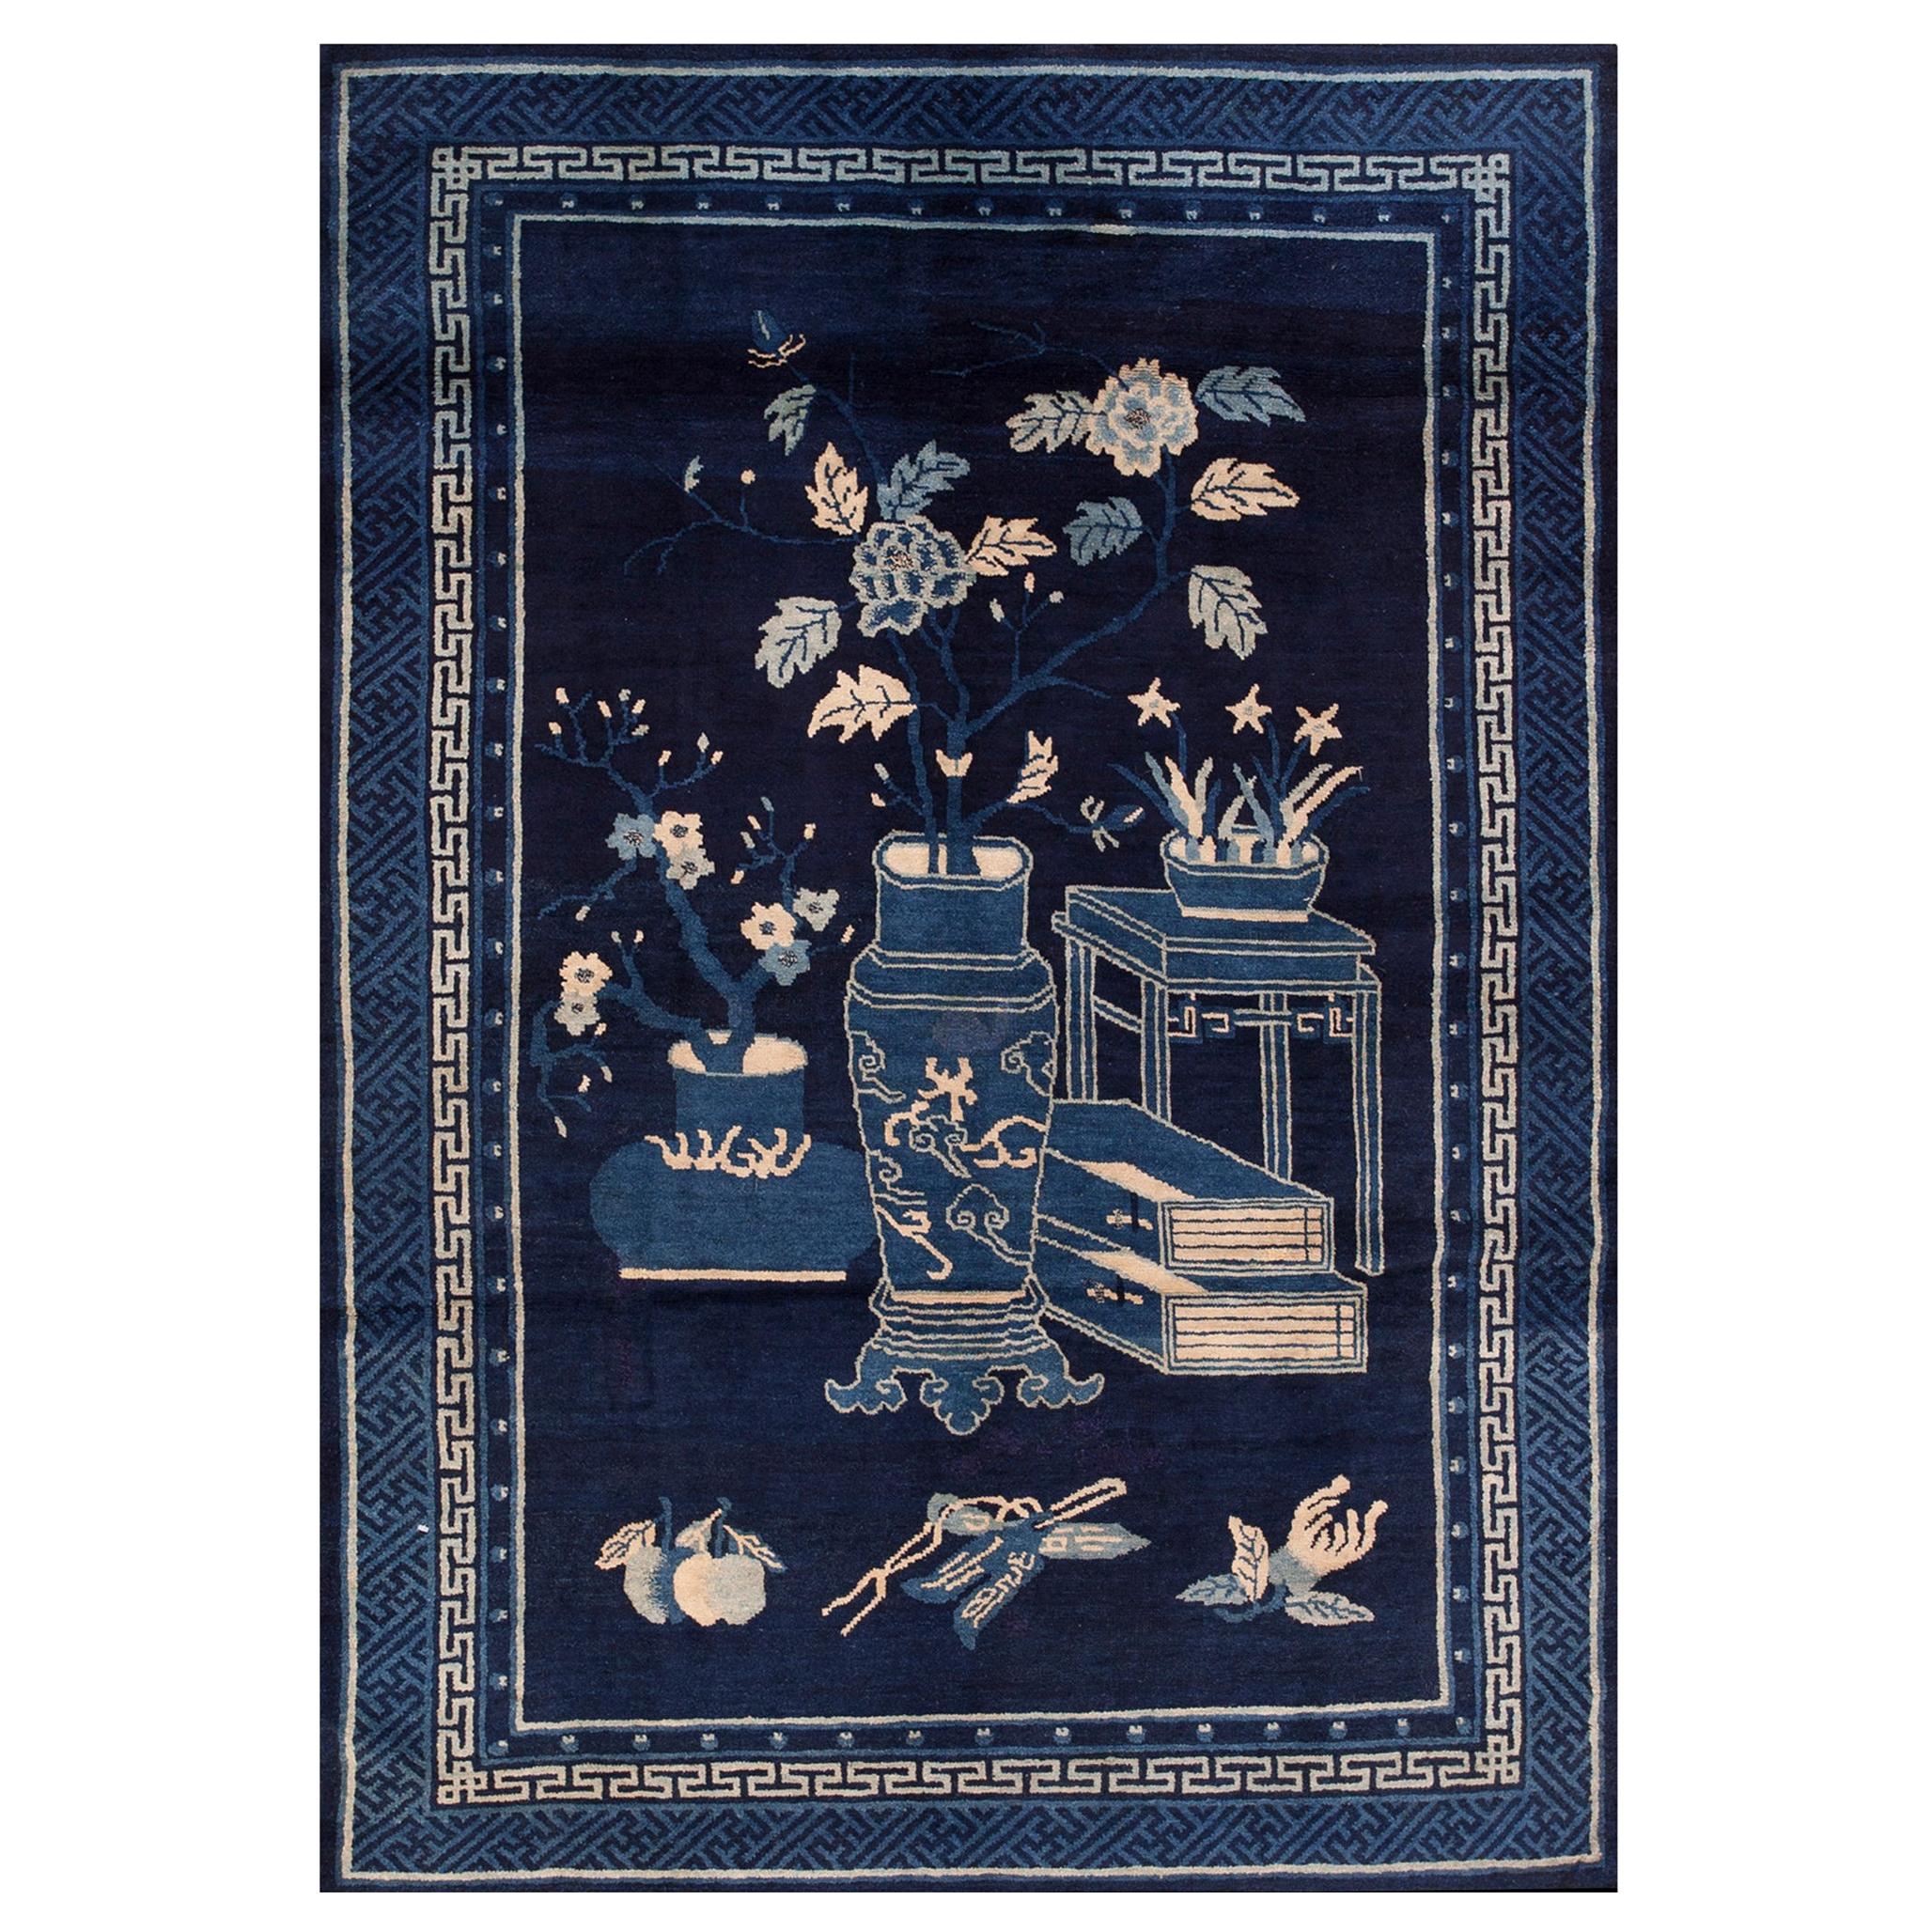 Early 20th Century Chinese Baotou Scholars Carpet ( 4' x 5'10" - 122 x 178 )